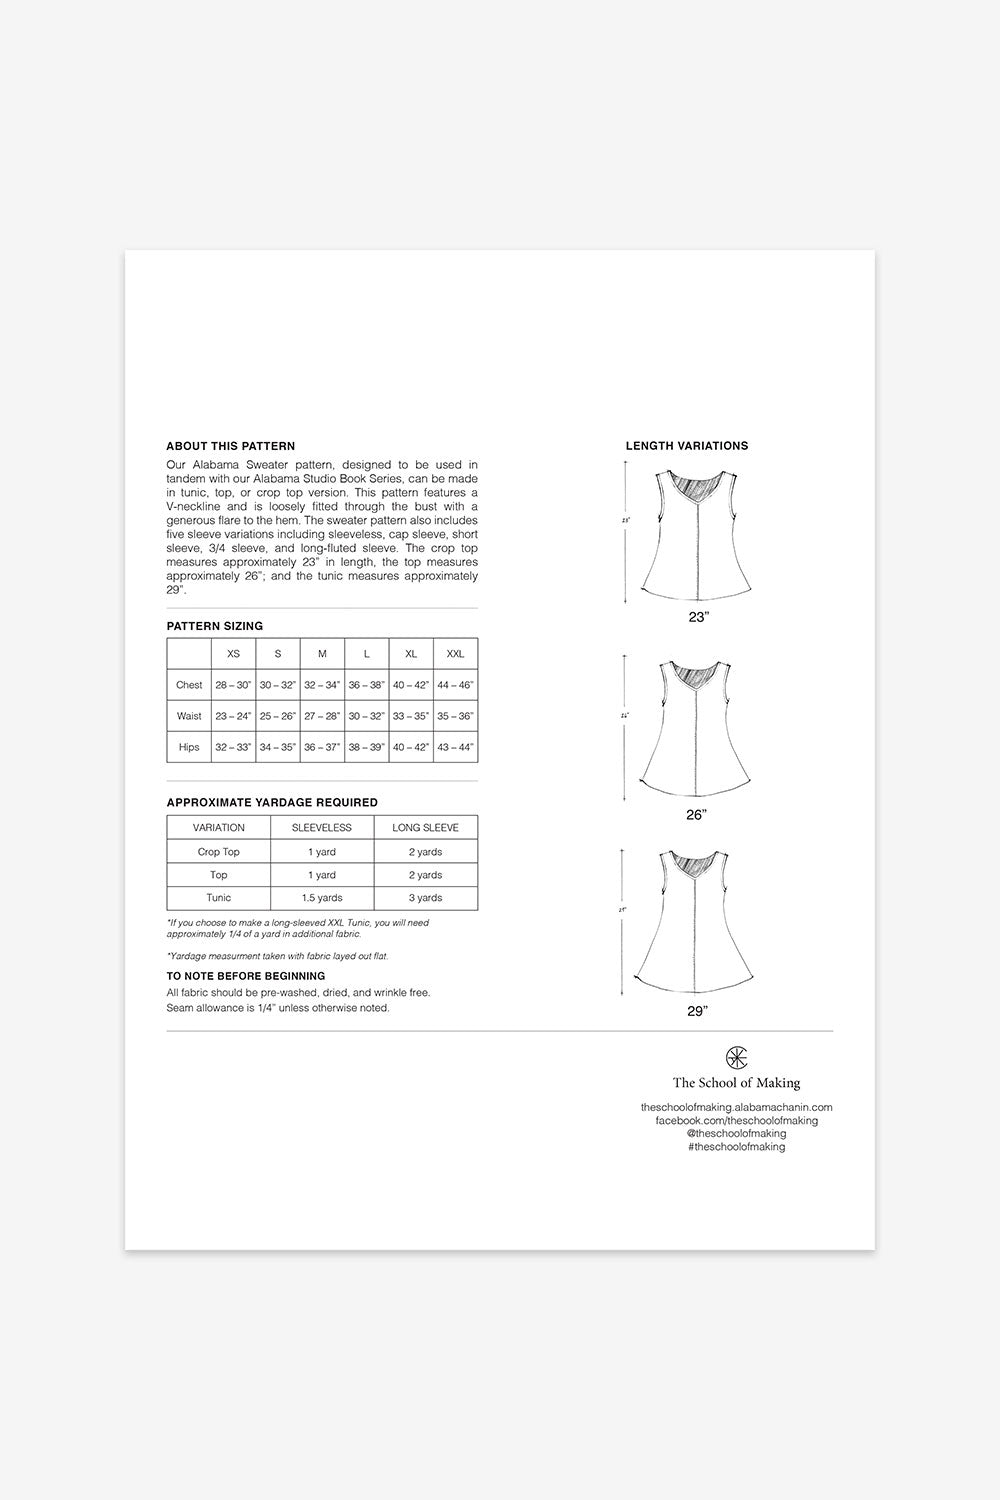 The School of Making Alabama Sweater Pattern Maker Supplies Sewing Pattern with Pattern Sizing and Adjustments